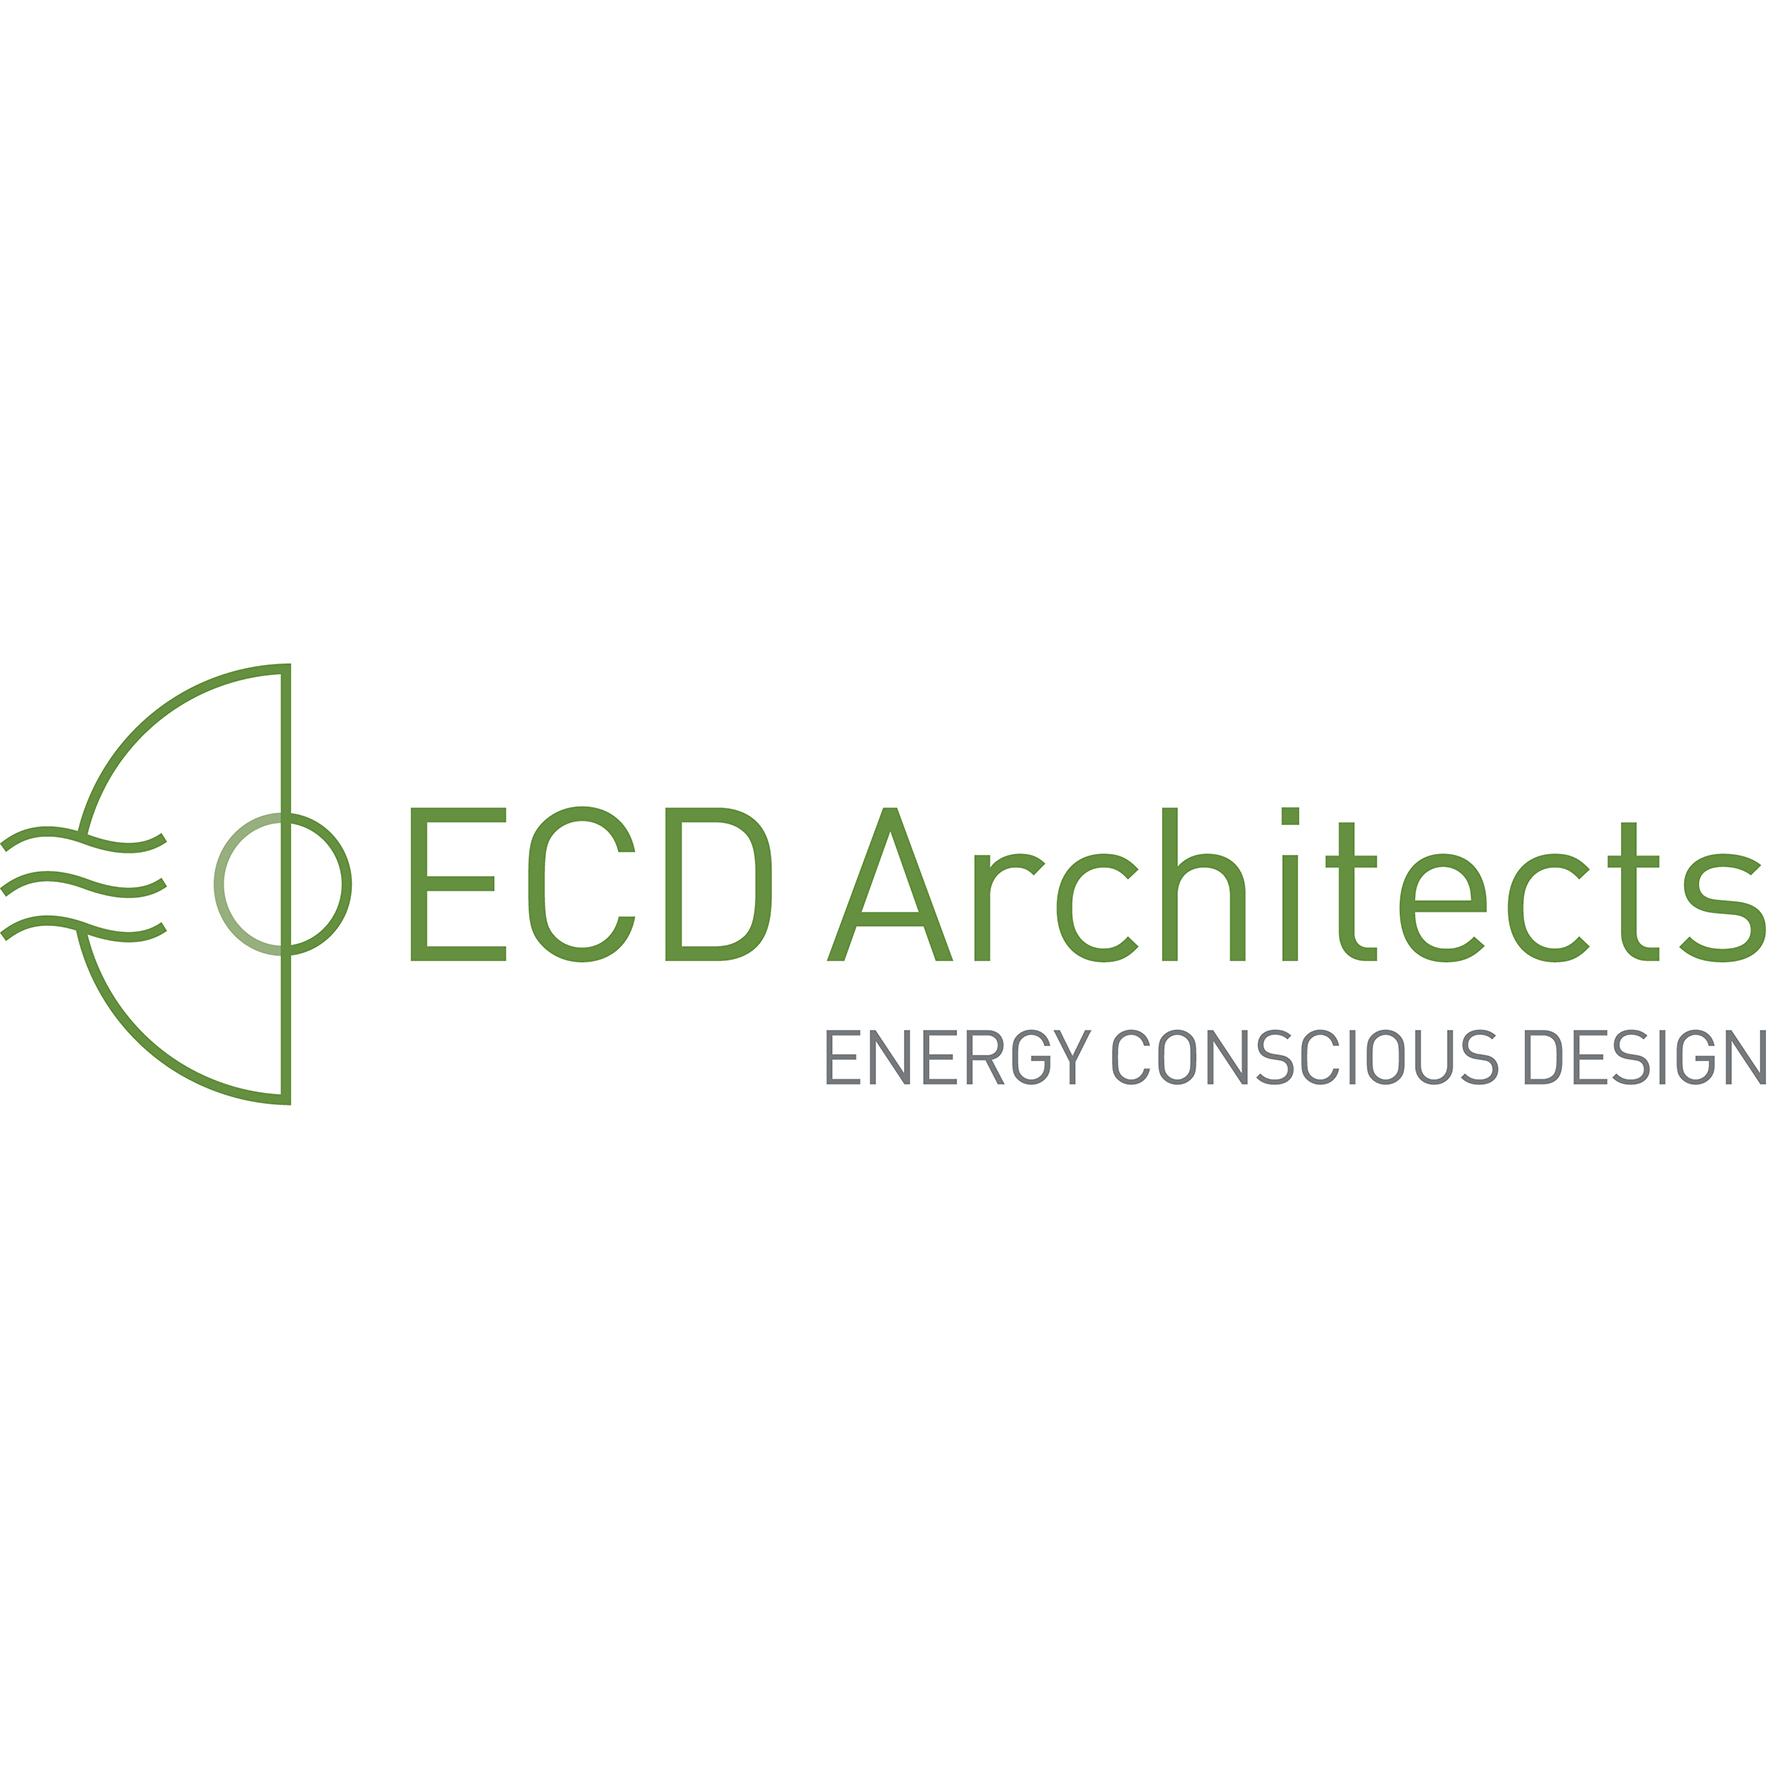 ECD Architects appointed to decarbonisation framework